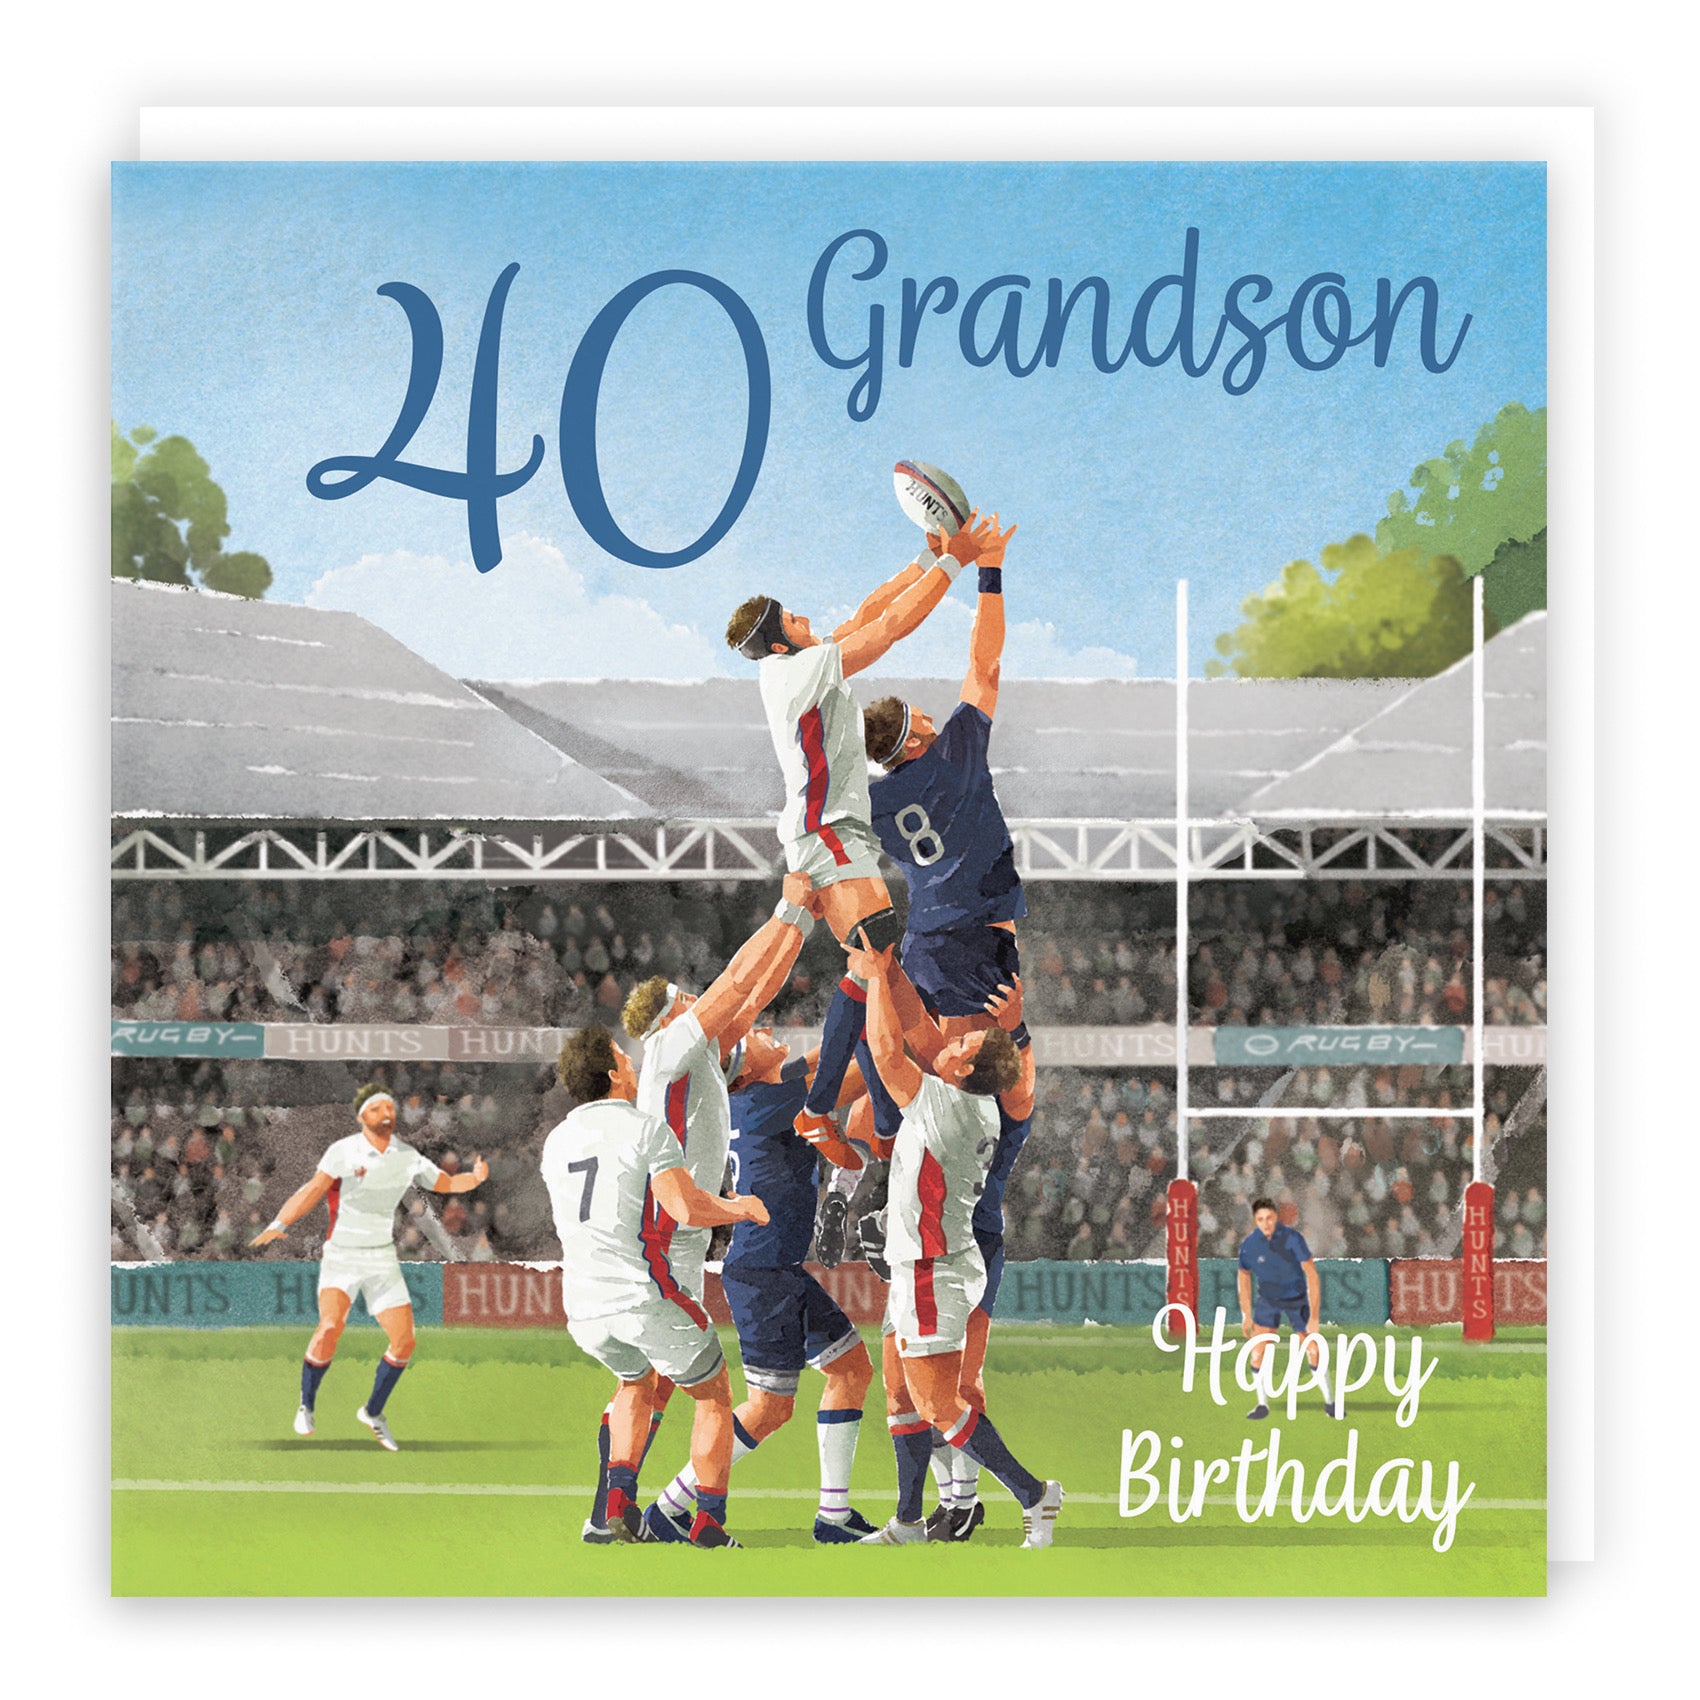 40th Grandson Rugby Birthday Card Milo's Gallery - Default Title (B0CPQSCMTK)